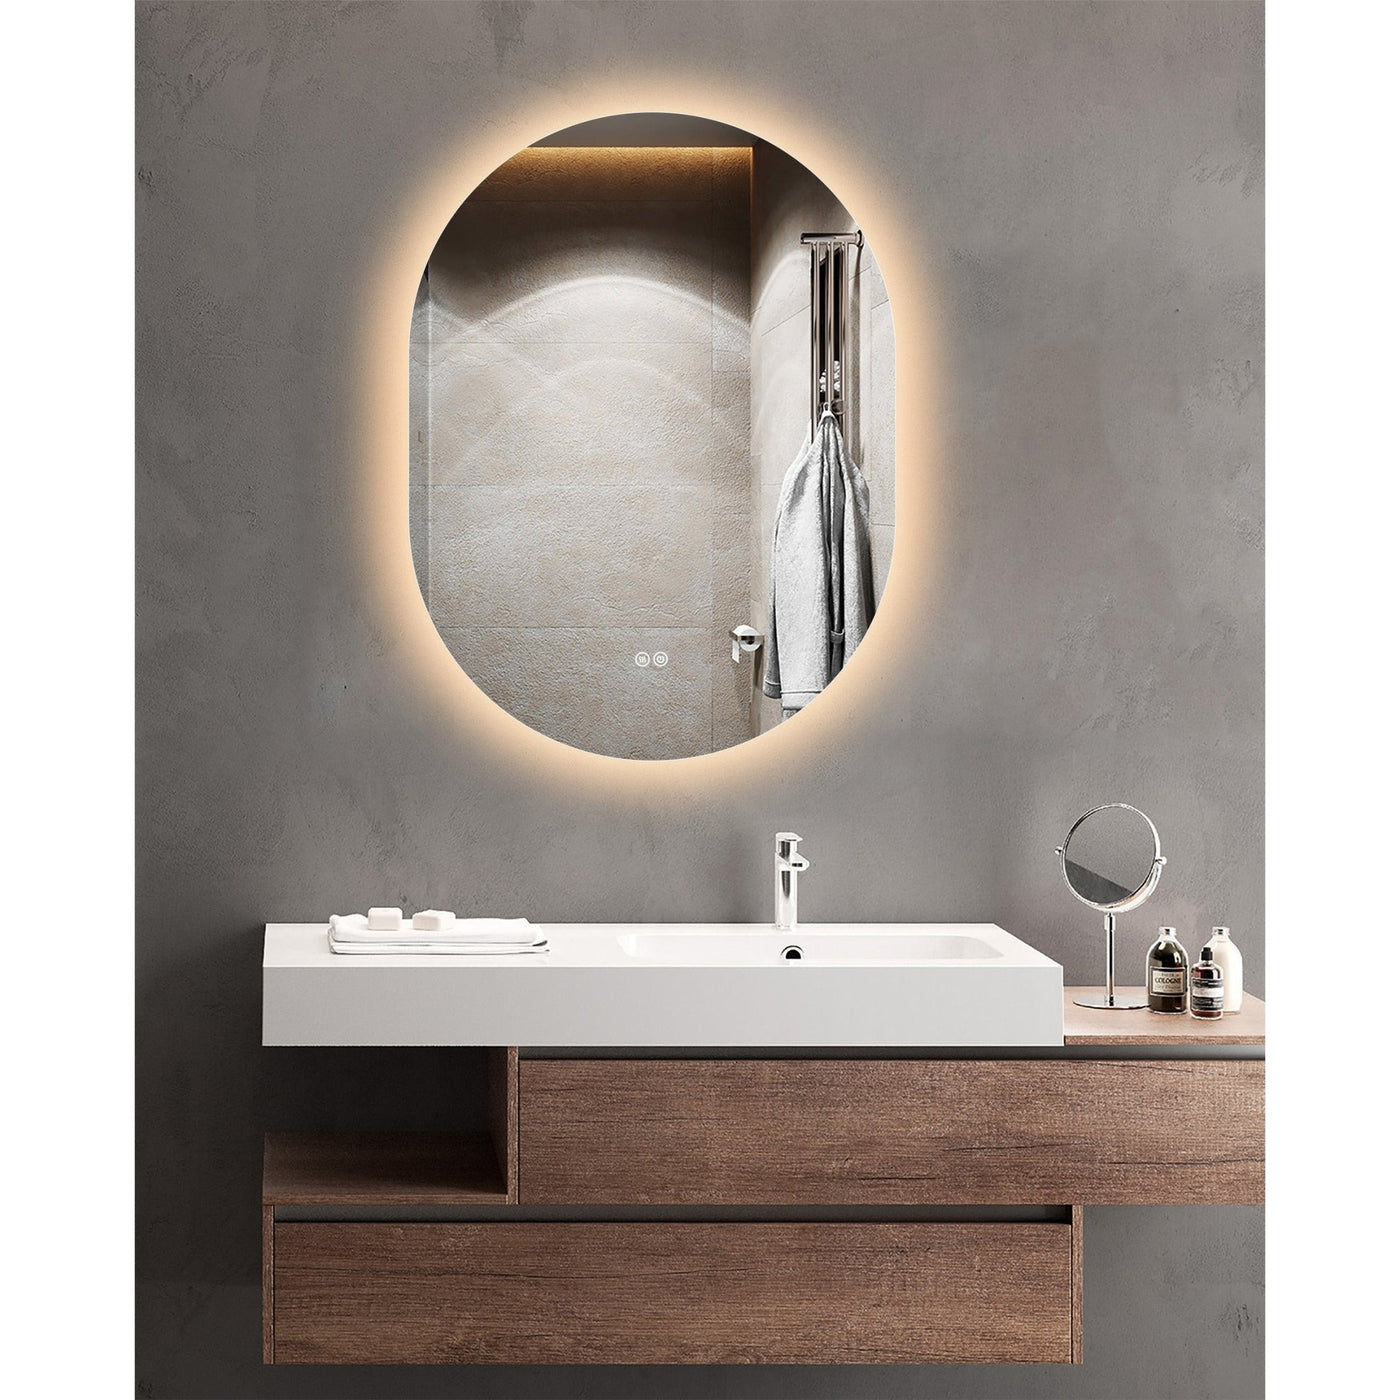 Backlit Oval LED Mirror with a Demister